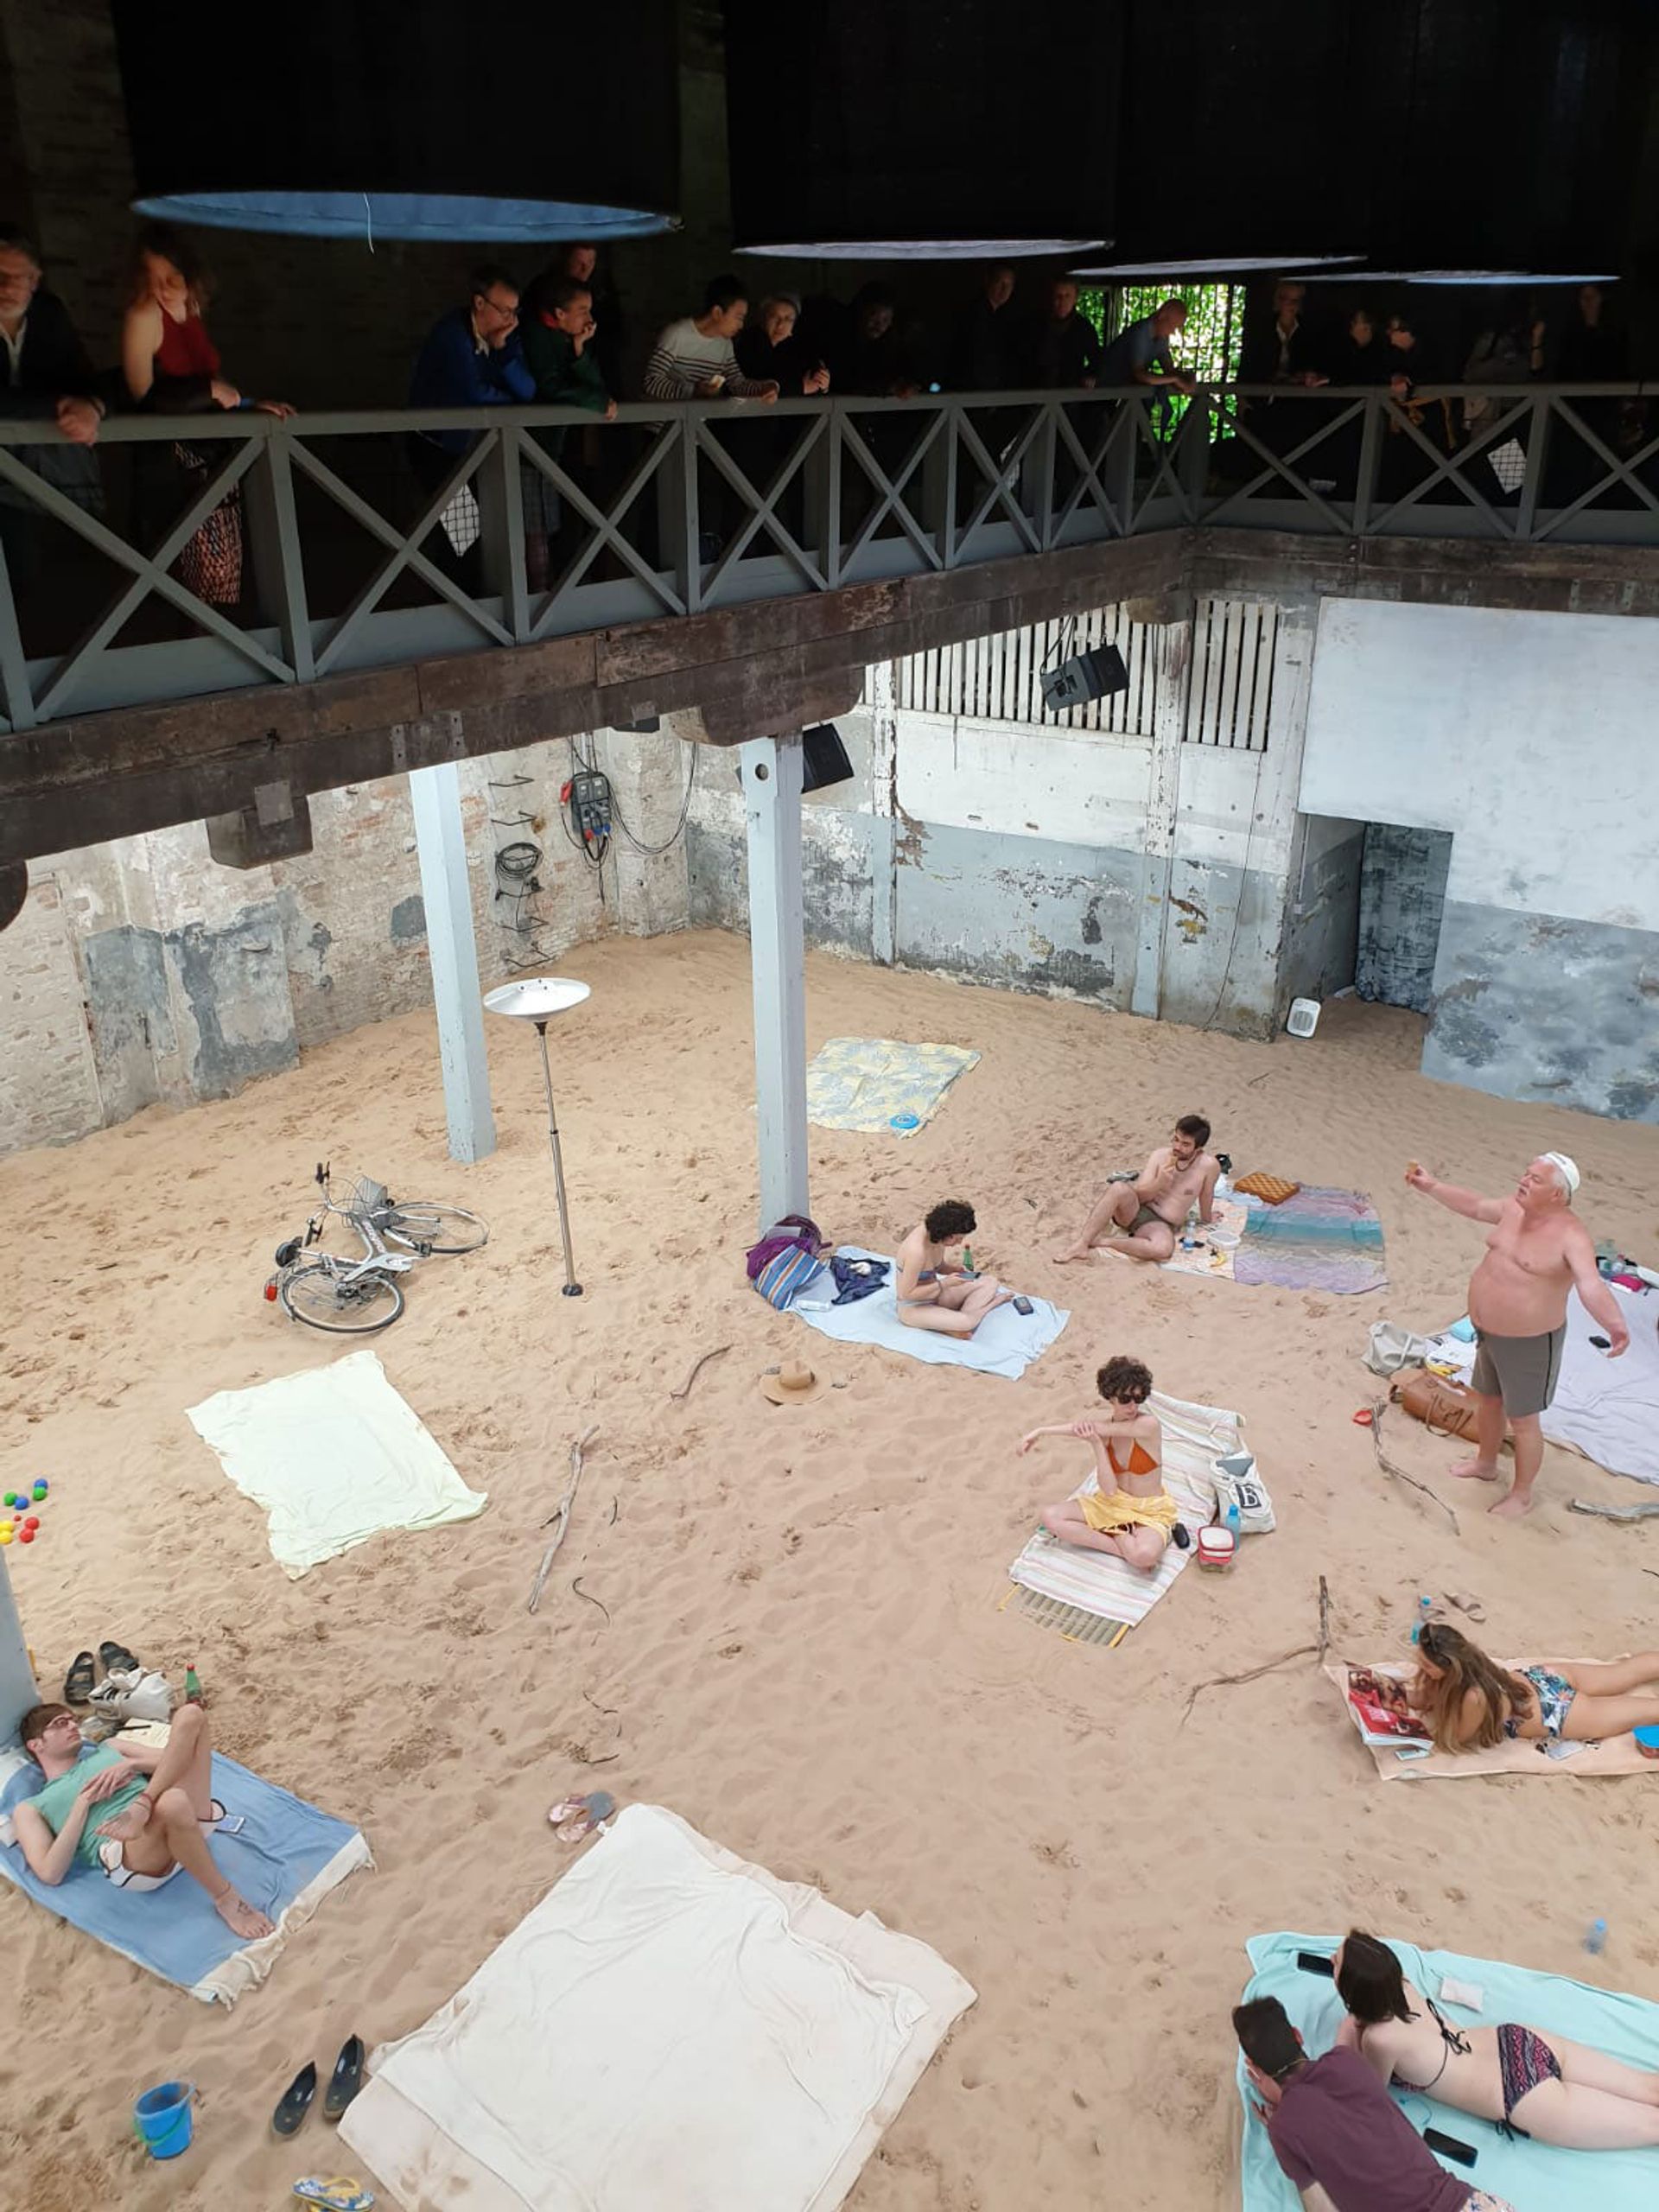 The indoor beach at the Lithuanian pavilion © The Art Newspaper